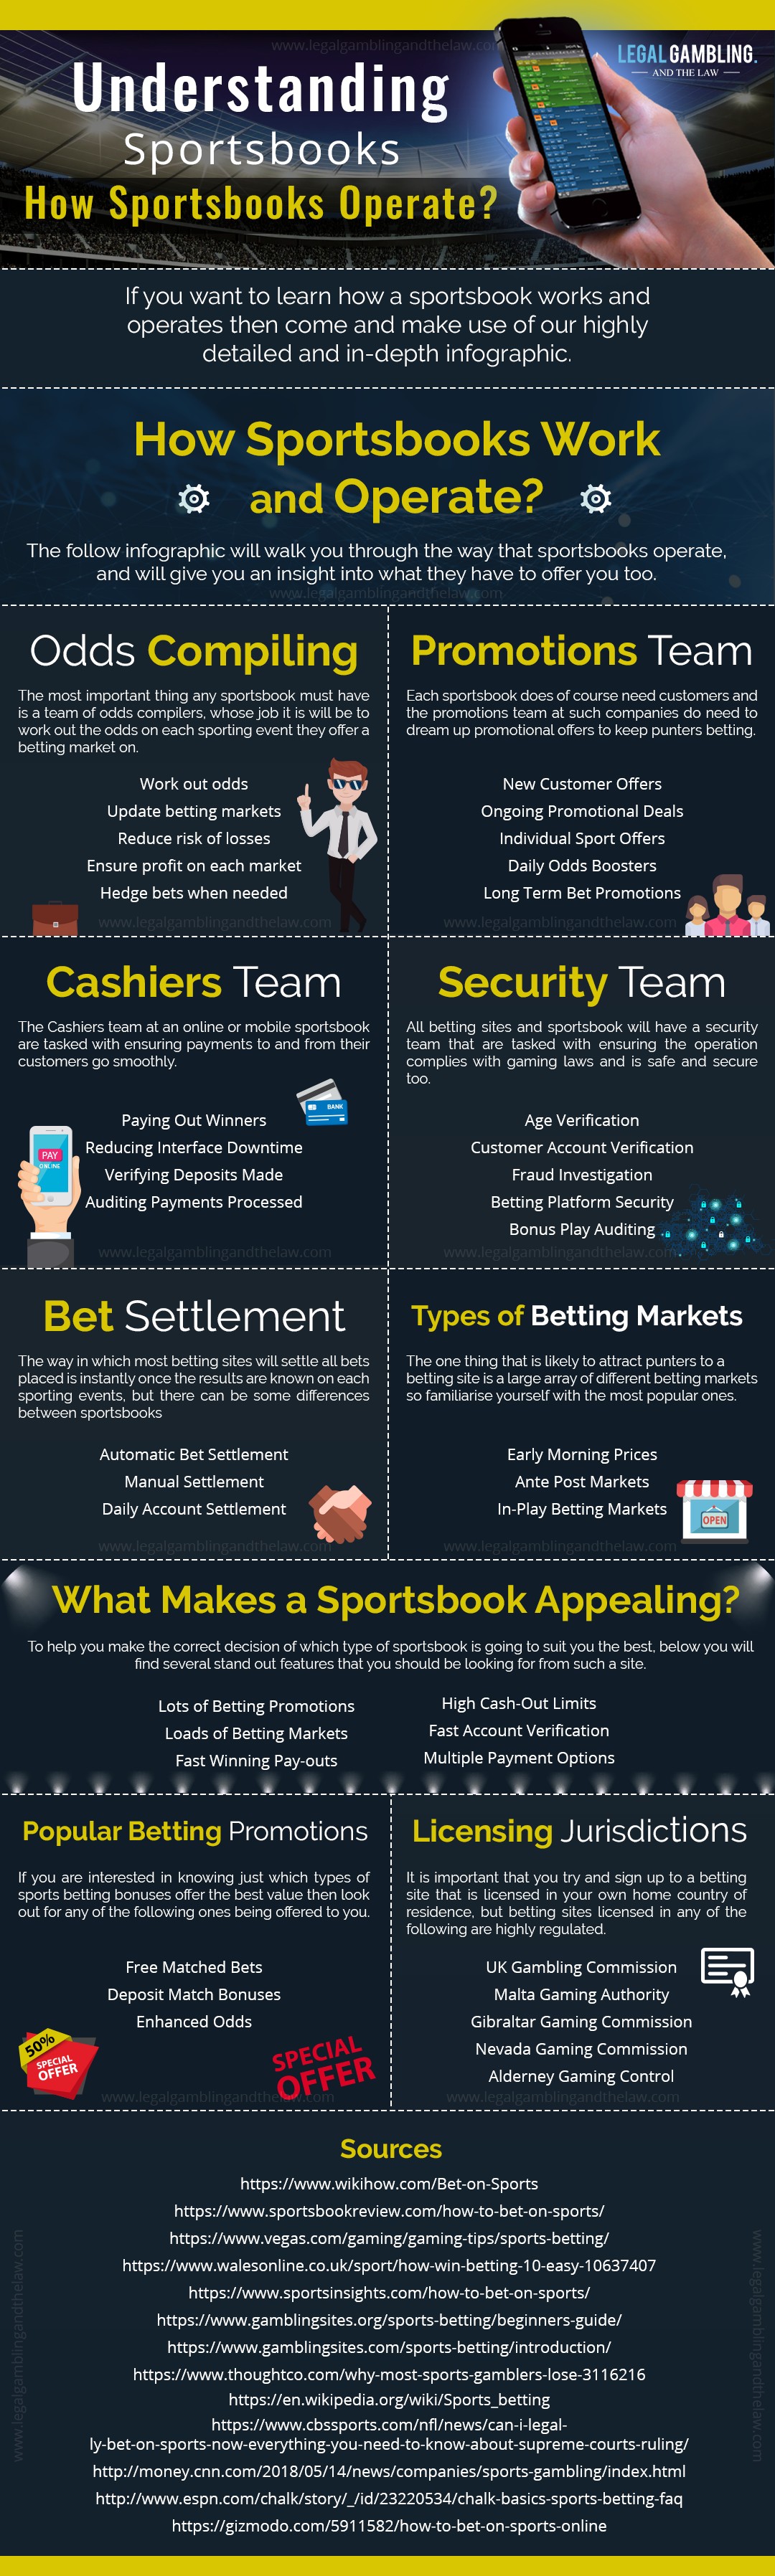 How Sportsbooks Work and Operate